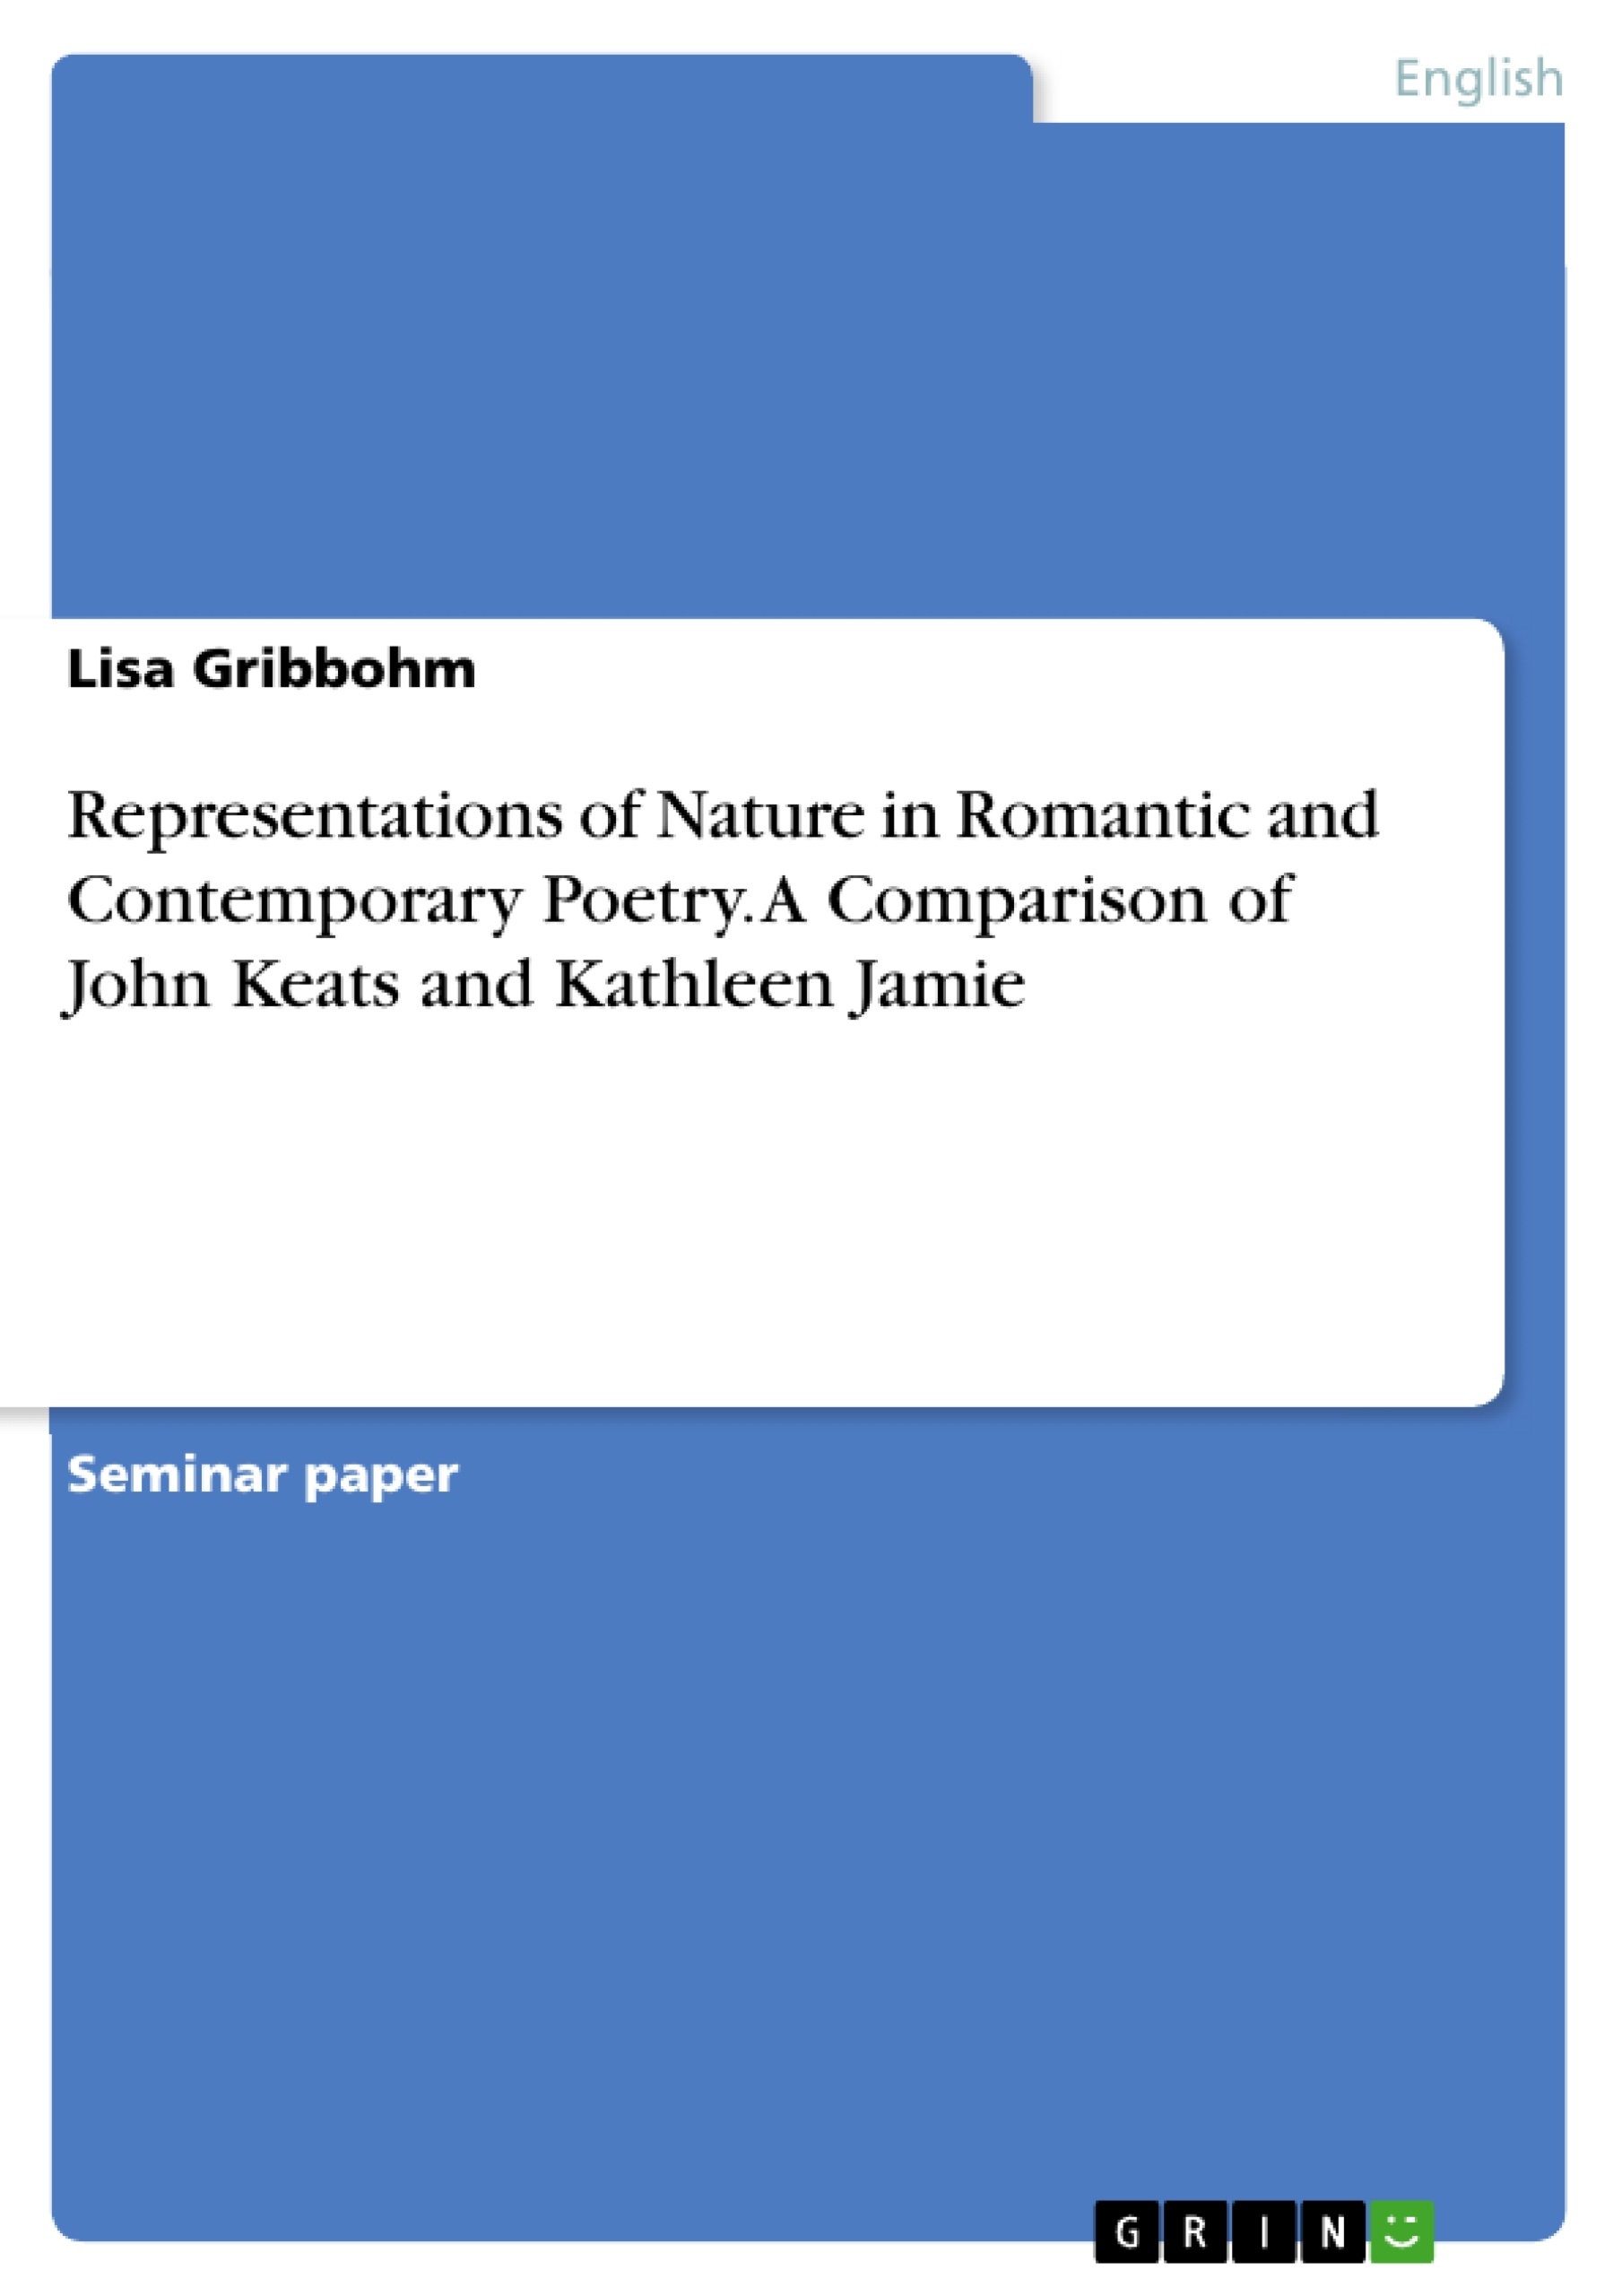 Titre: Representations of Nature in Romantic and Contemporary Poetry. A Comparison of John Keats and Kathleen Jamie